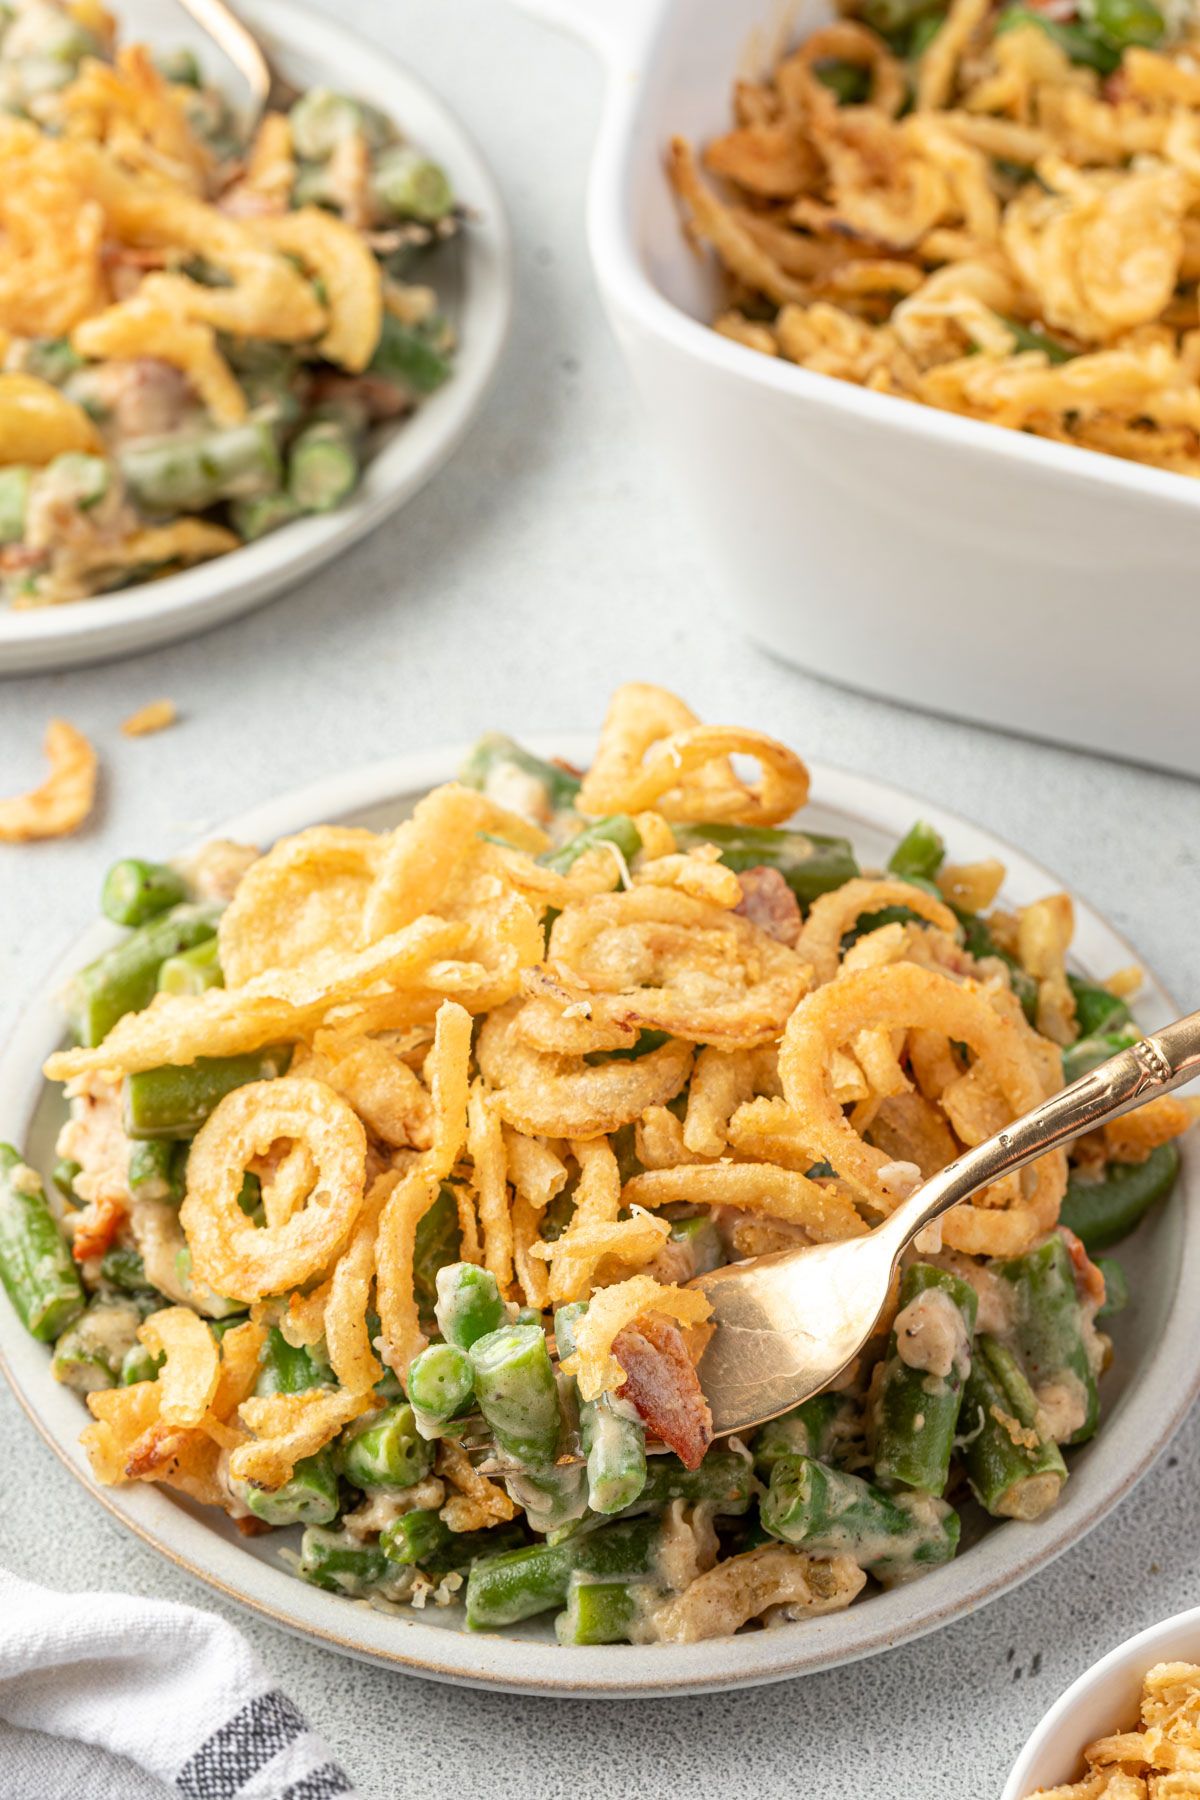 Green bean casserole topped with fried onions on a plate with fork scooping a bite.